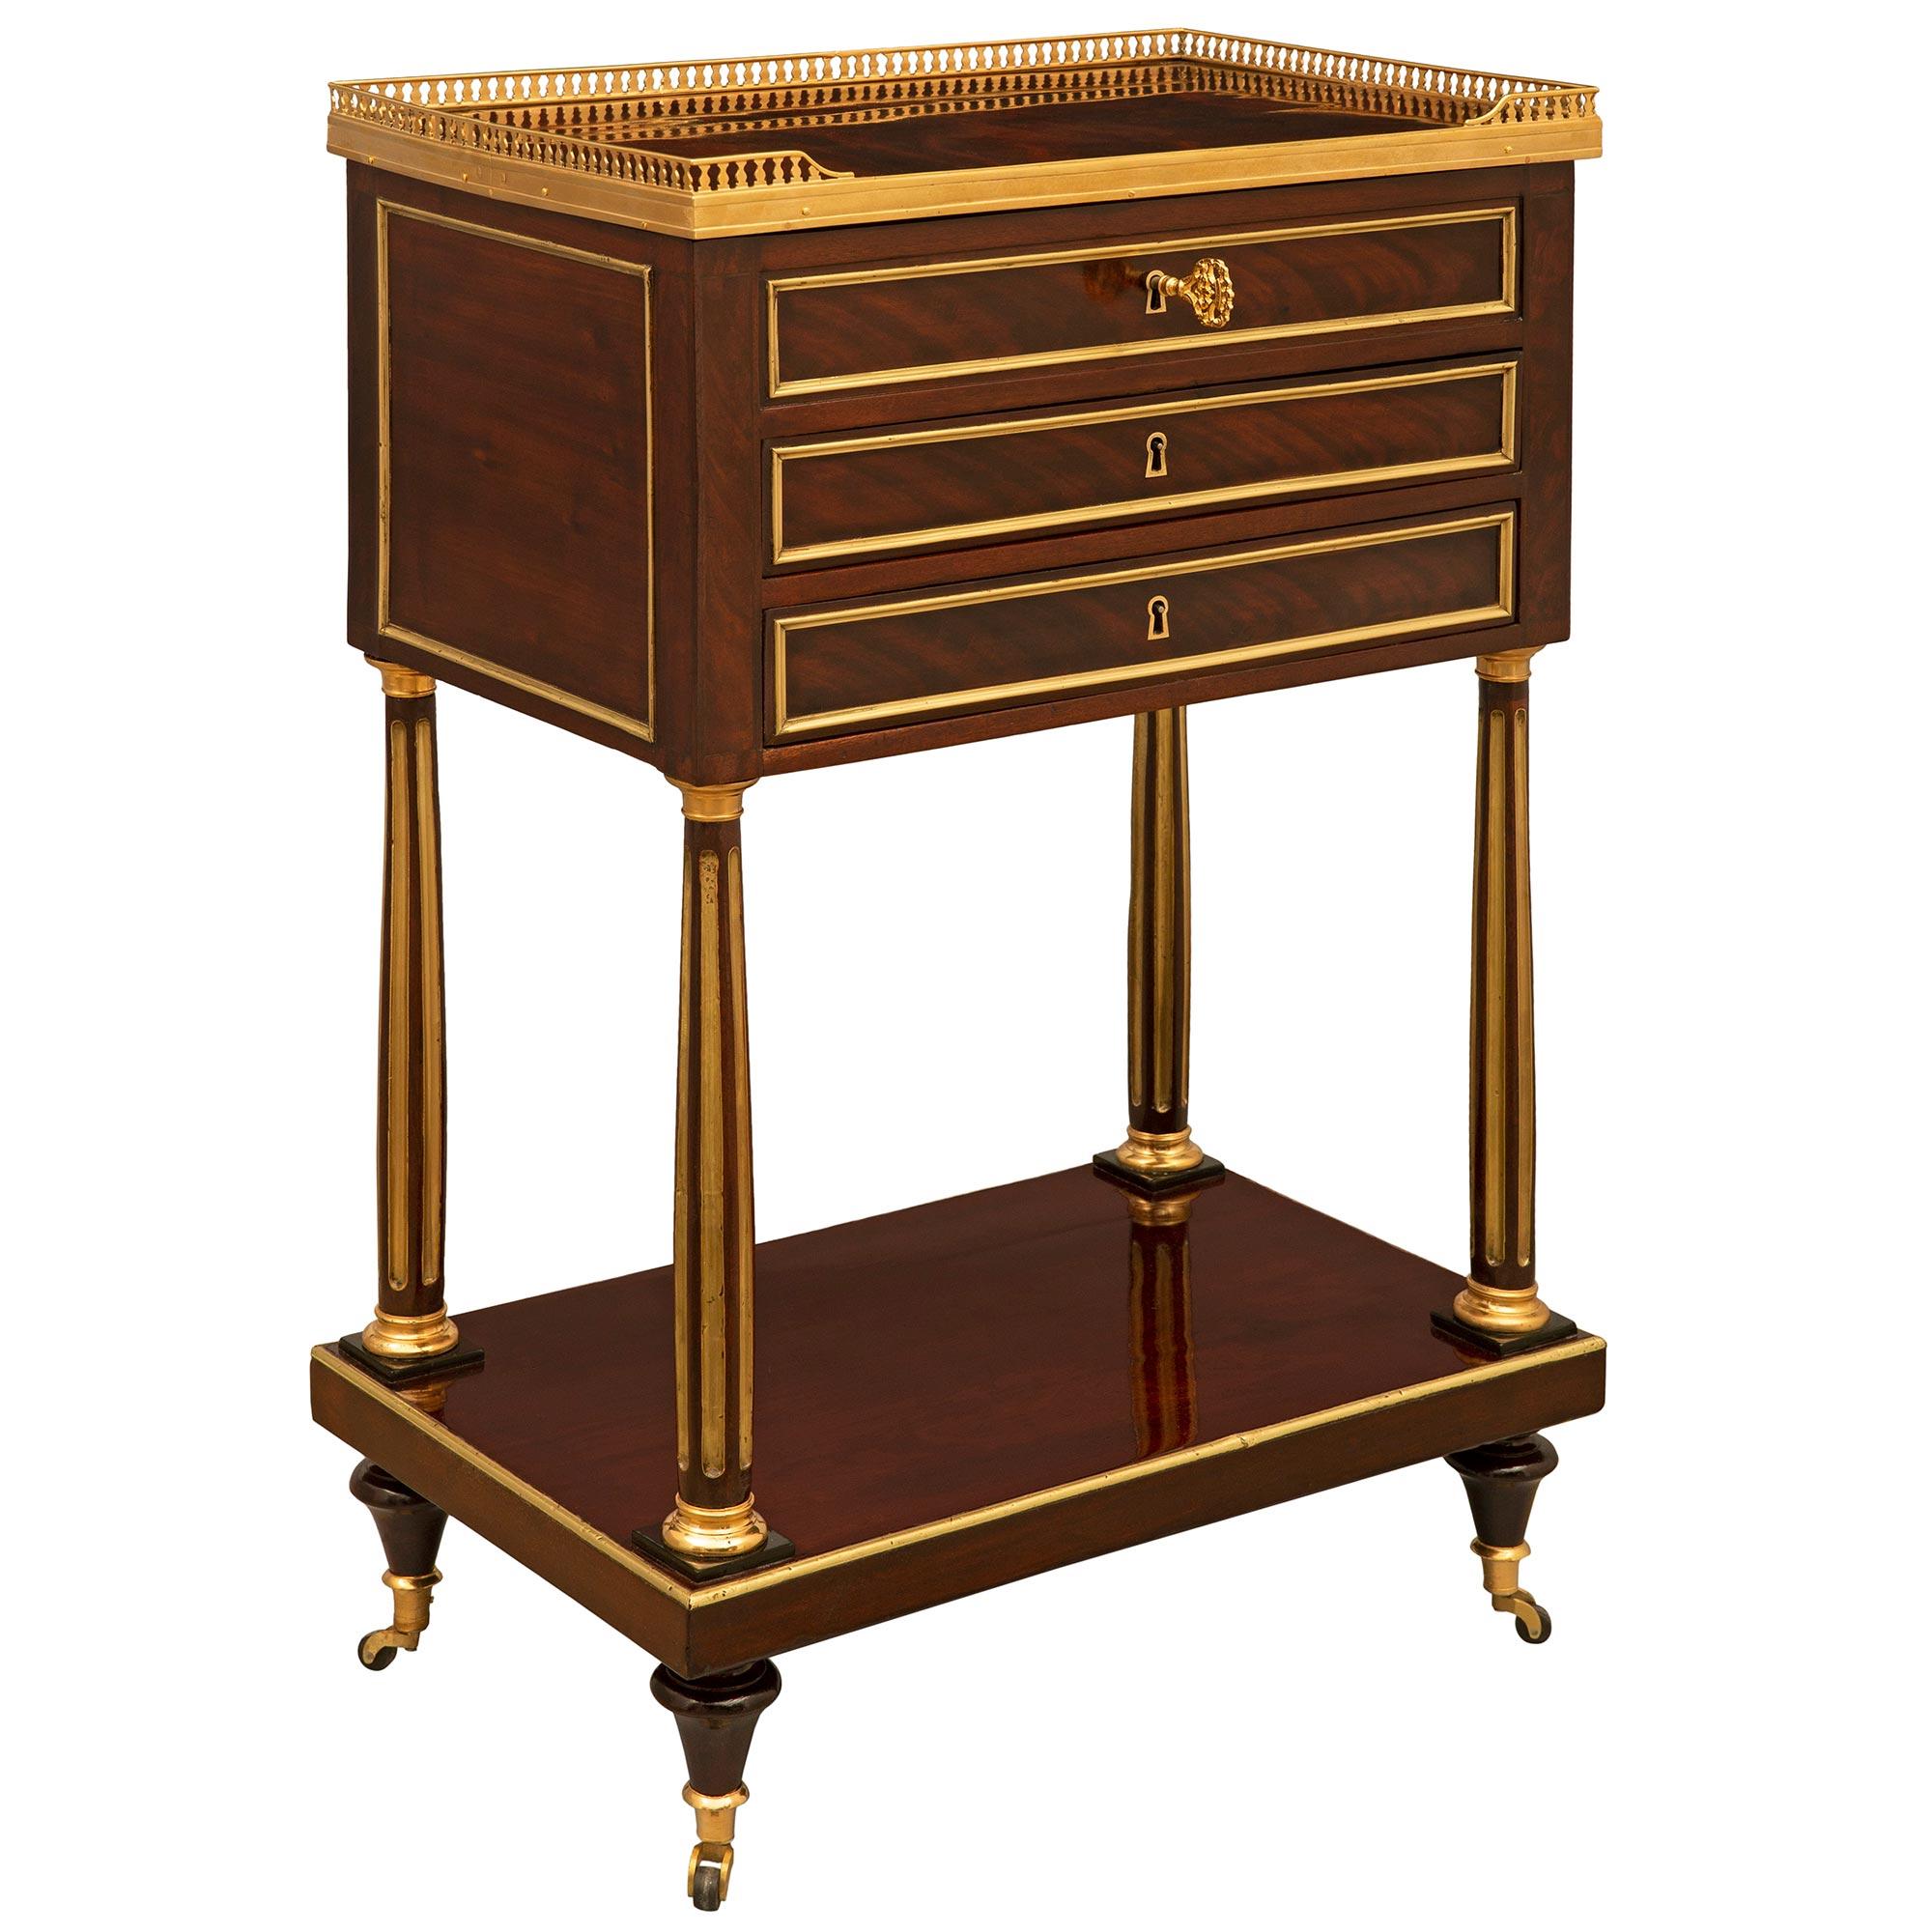 French 18th Century Louis XVI Period Mahogany and Ormolu Vanity/Side Table In Good Condition For Sale In West Palm Beach, FL